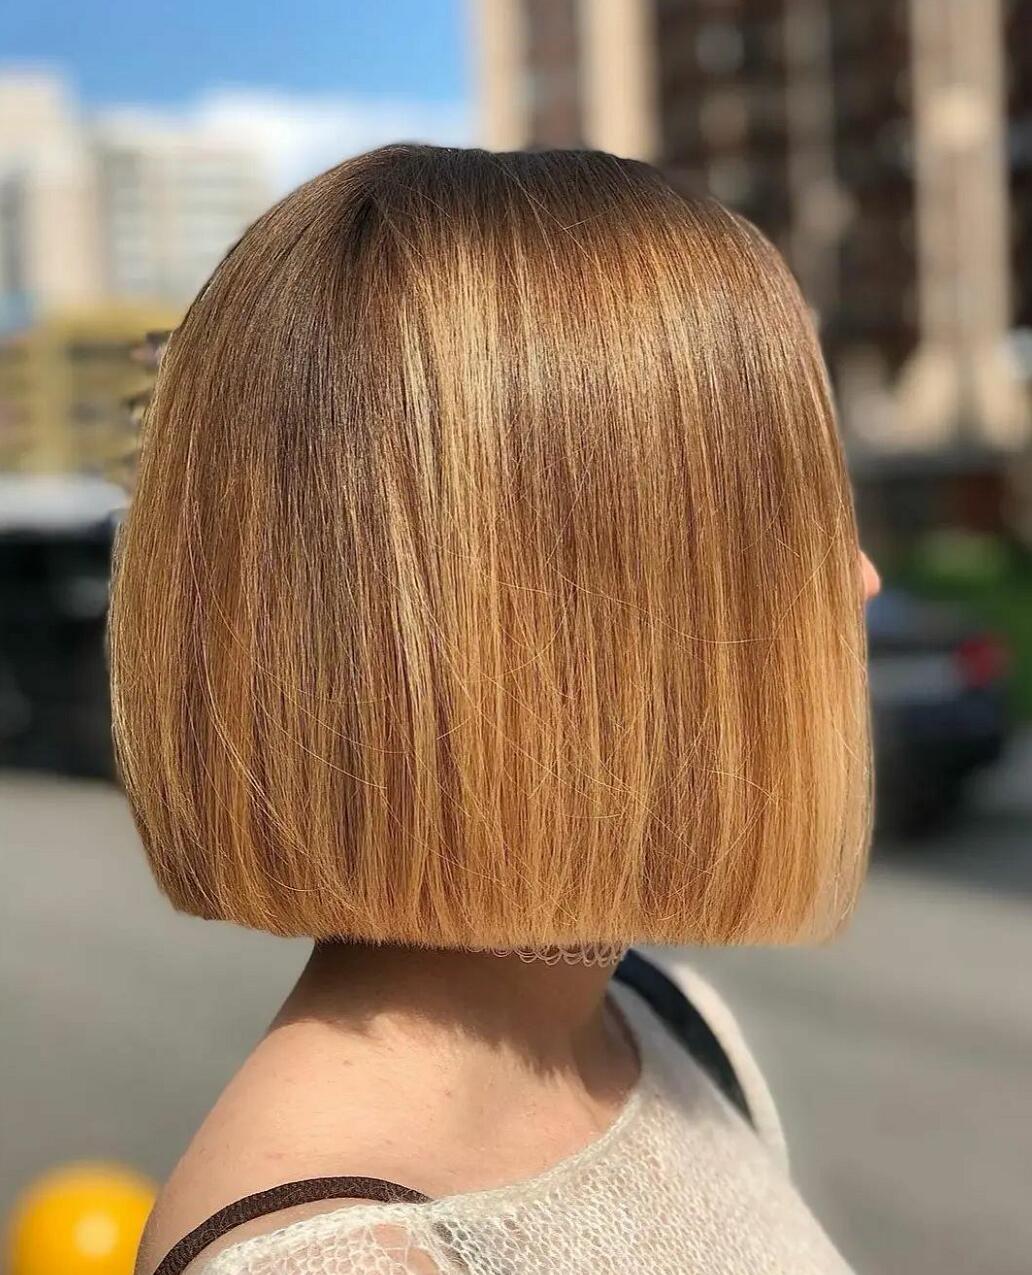 20 Amazing Bob Hairstyles That Look Great on Everyone ...